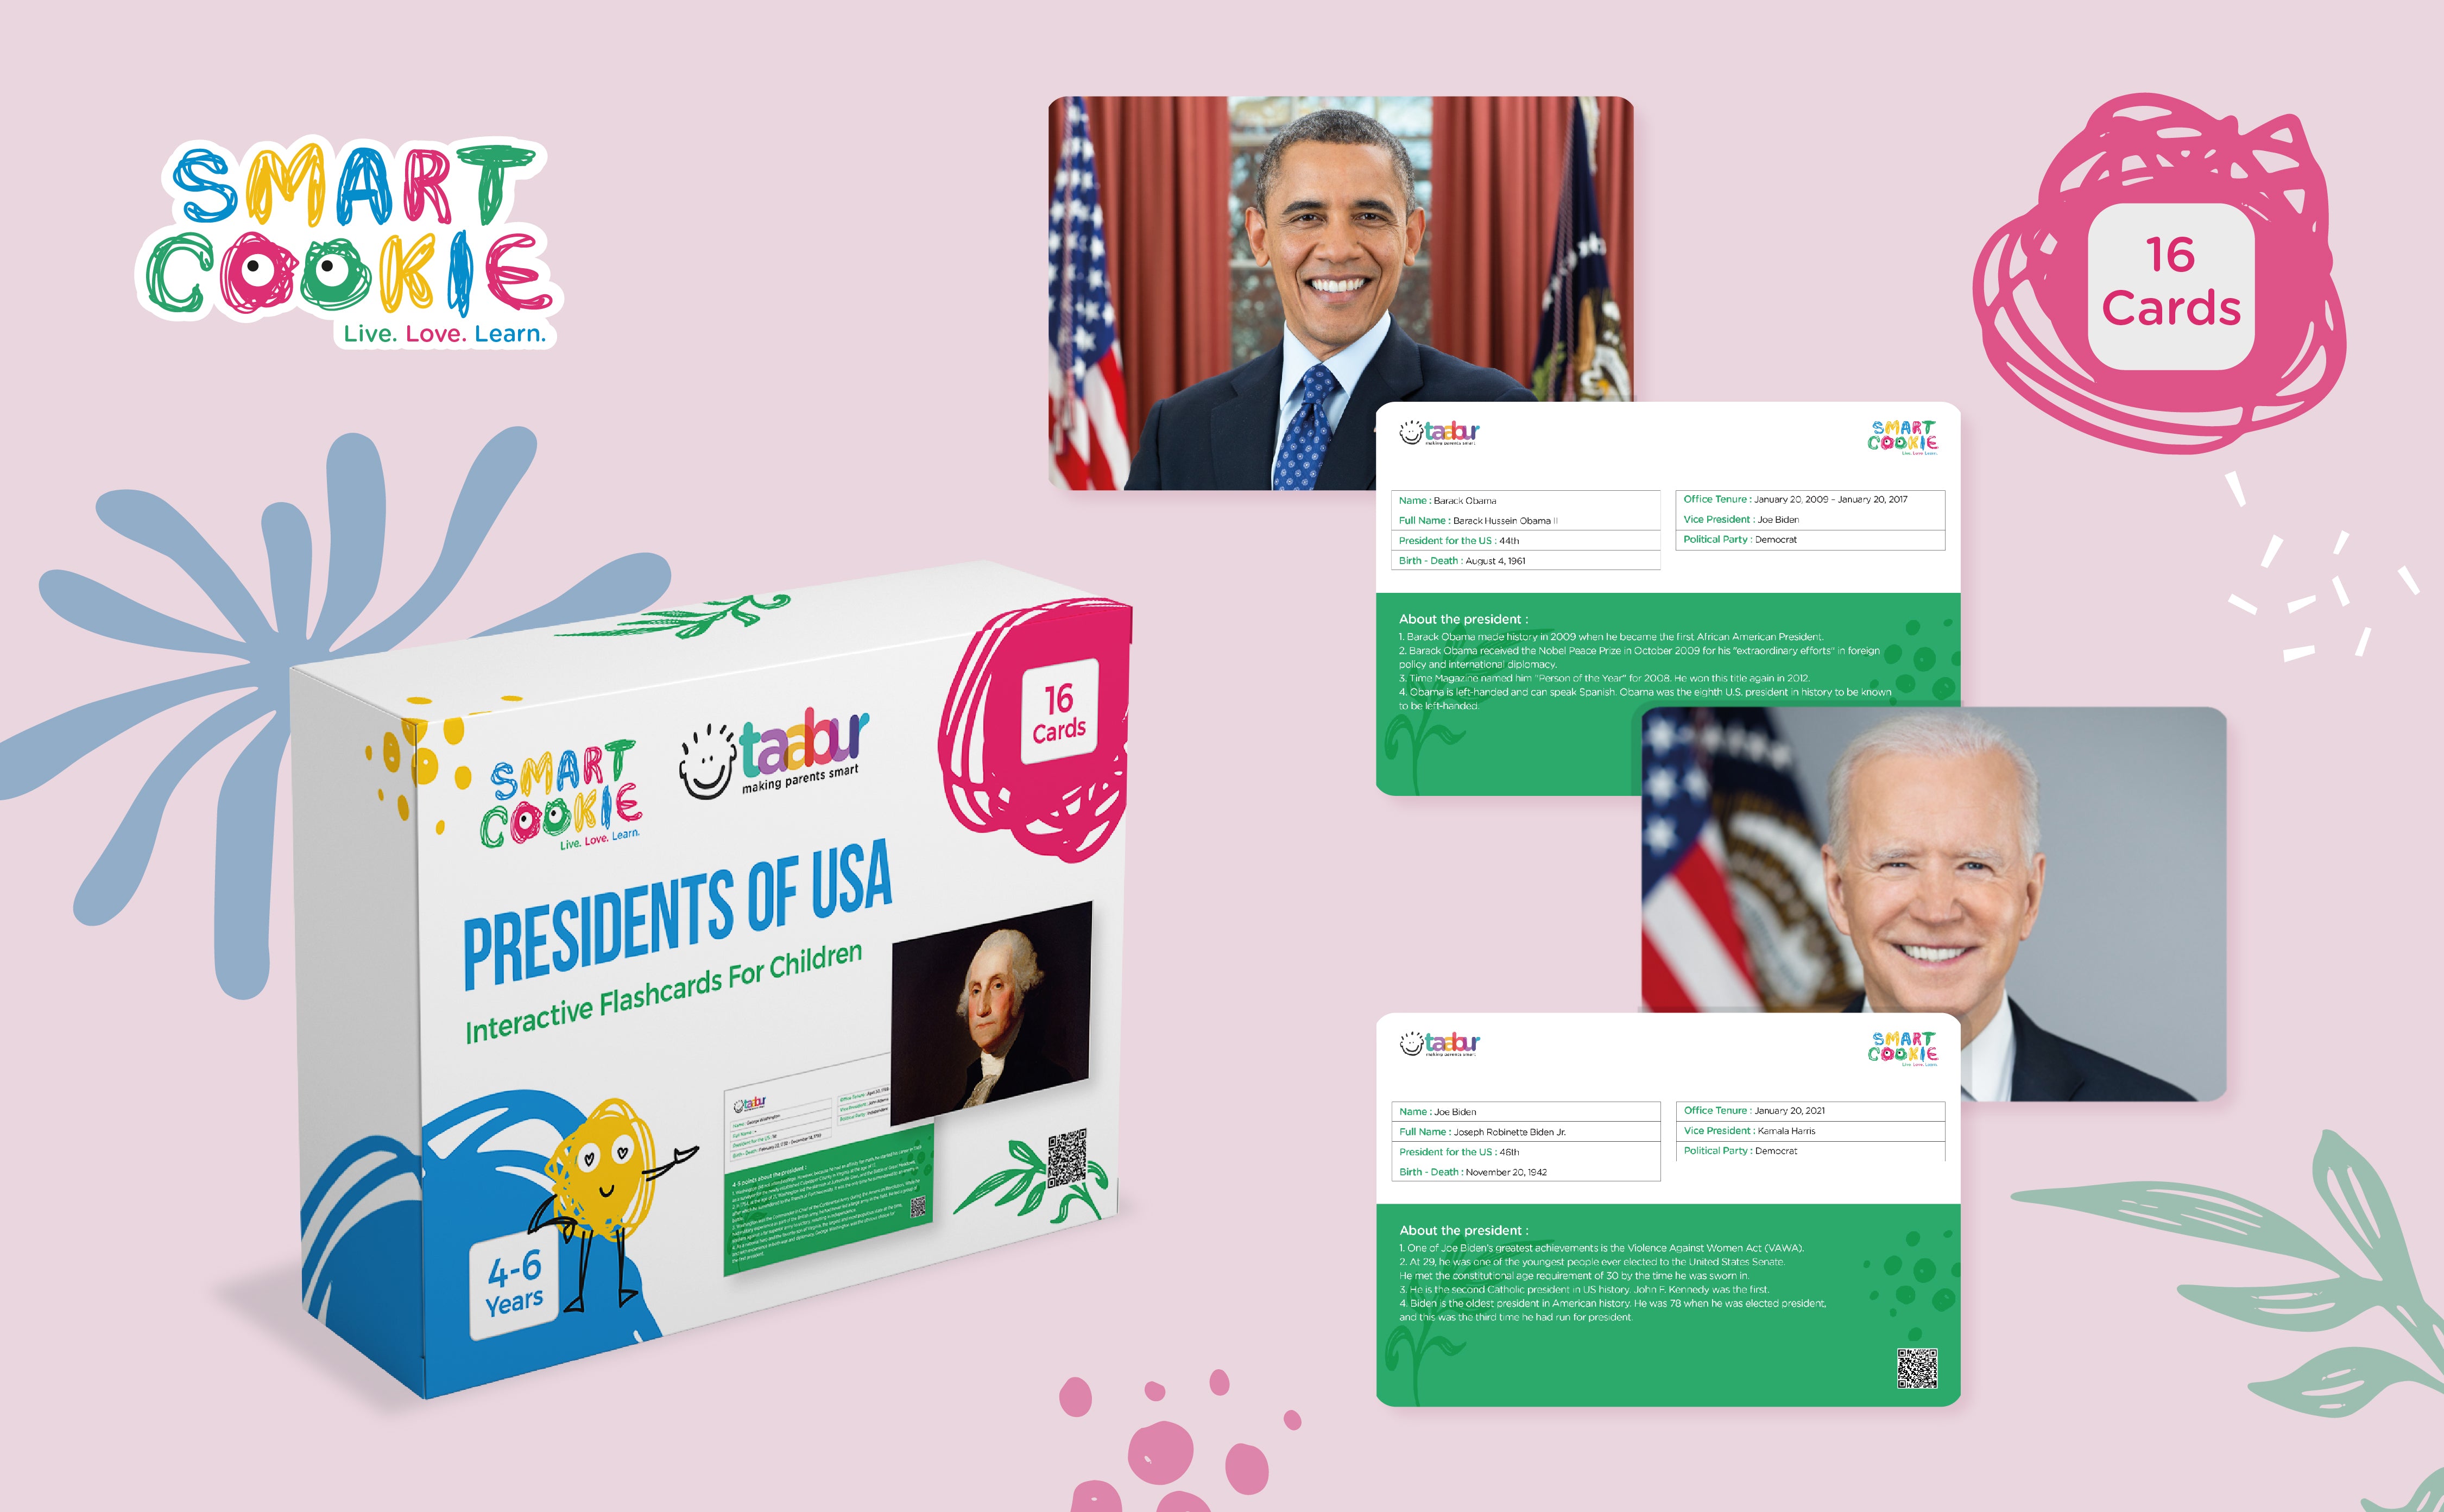 Presidents of USA - Interactive Flash Cards for Children (16 Cards) - for Kids Aged 4 to 6 Years Old